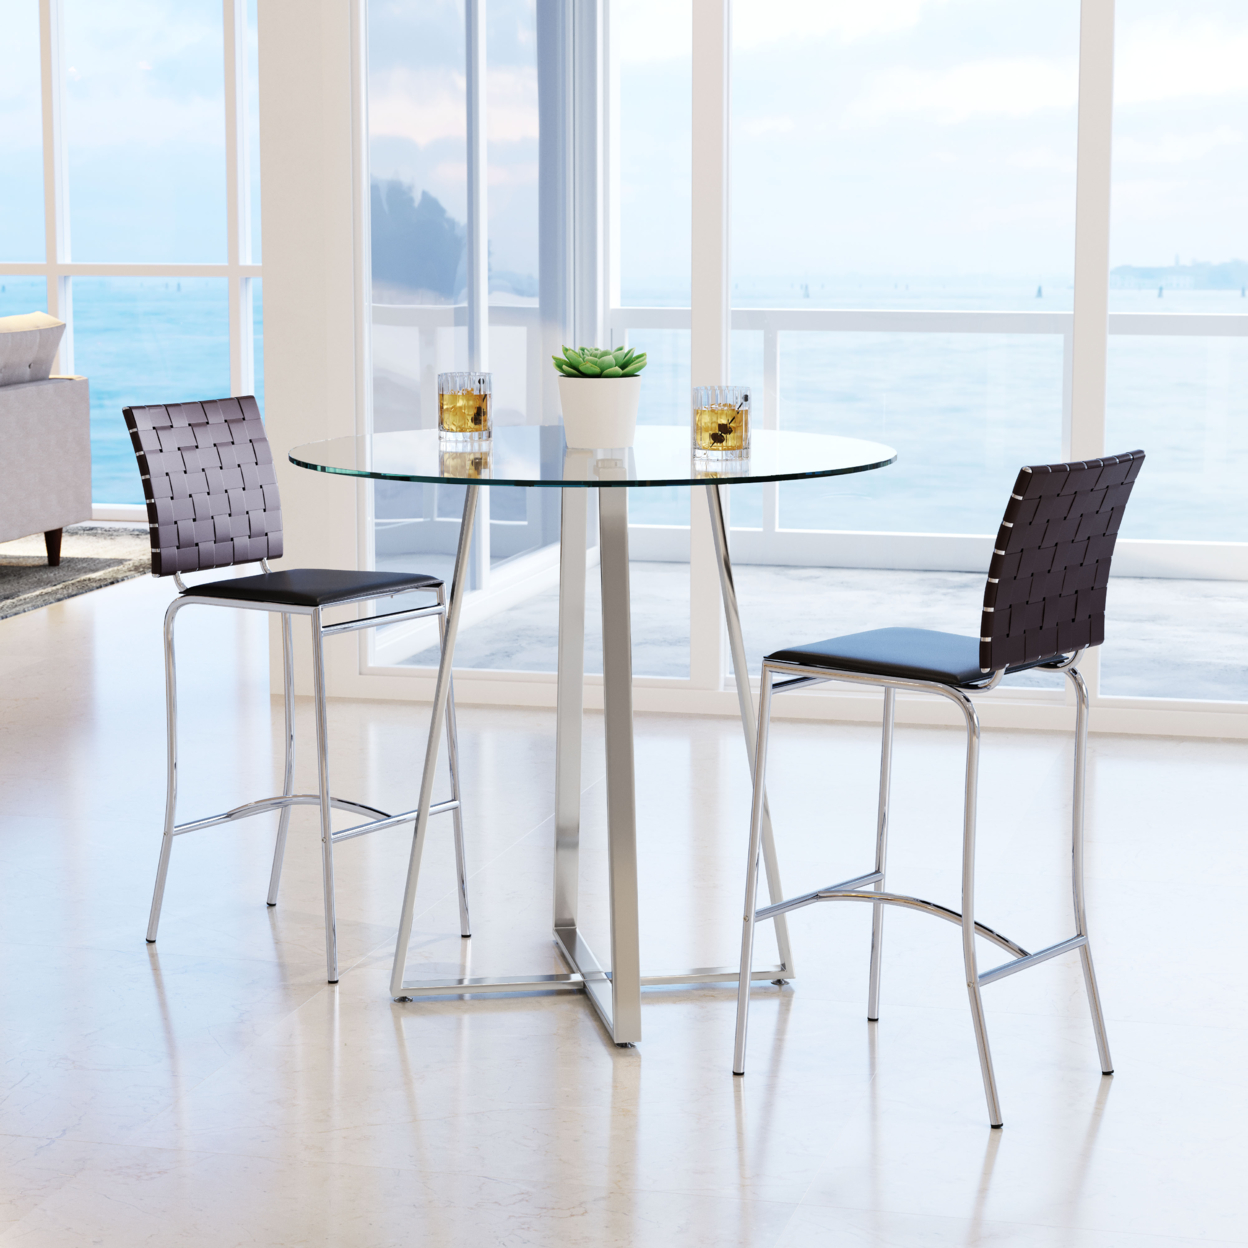 Zuo Modern Criss Cross Bar Stools in White and Silver (Set of 2)